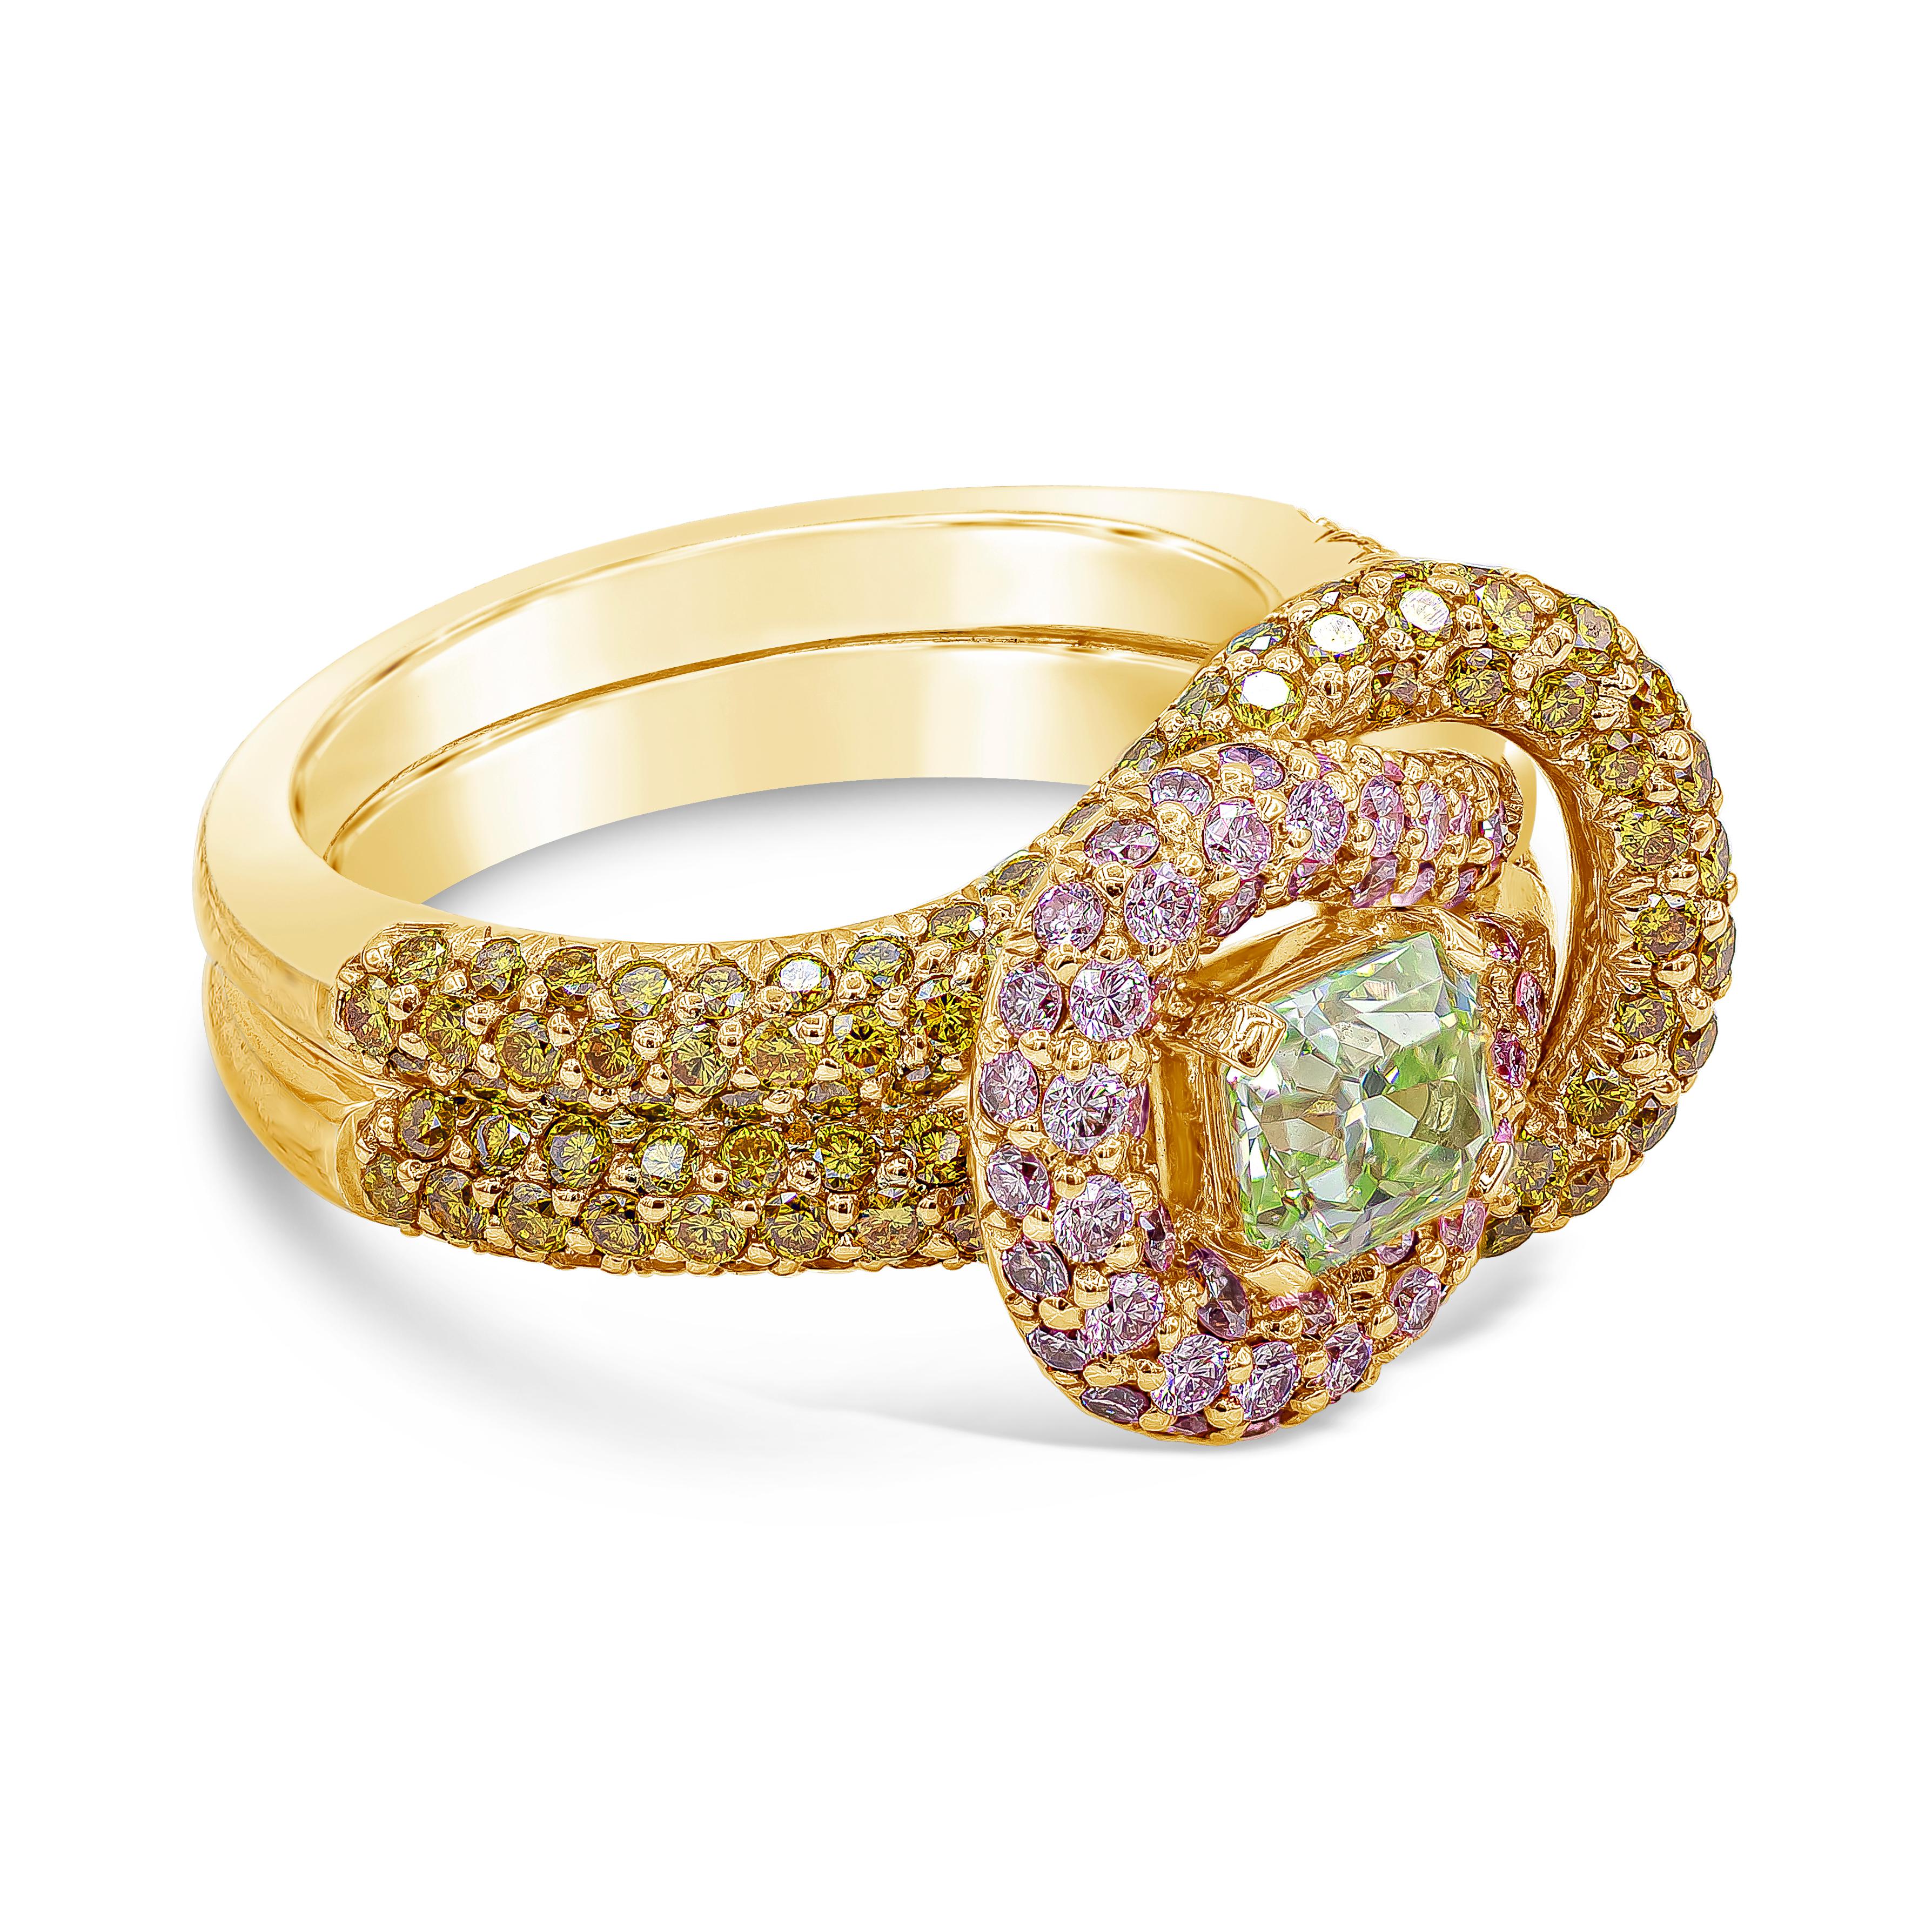 A beautiful GIA certified 0.70 carat radiant cut fancy intense green, VS1 in clarity and set in an 18K Rose Gold. Knot-like design and surrounded with brilliant round yellow and pink diamonds. Accompanied with GIA report. Size 6 US and resizable